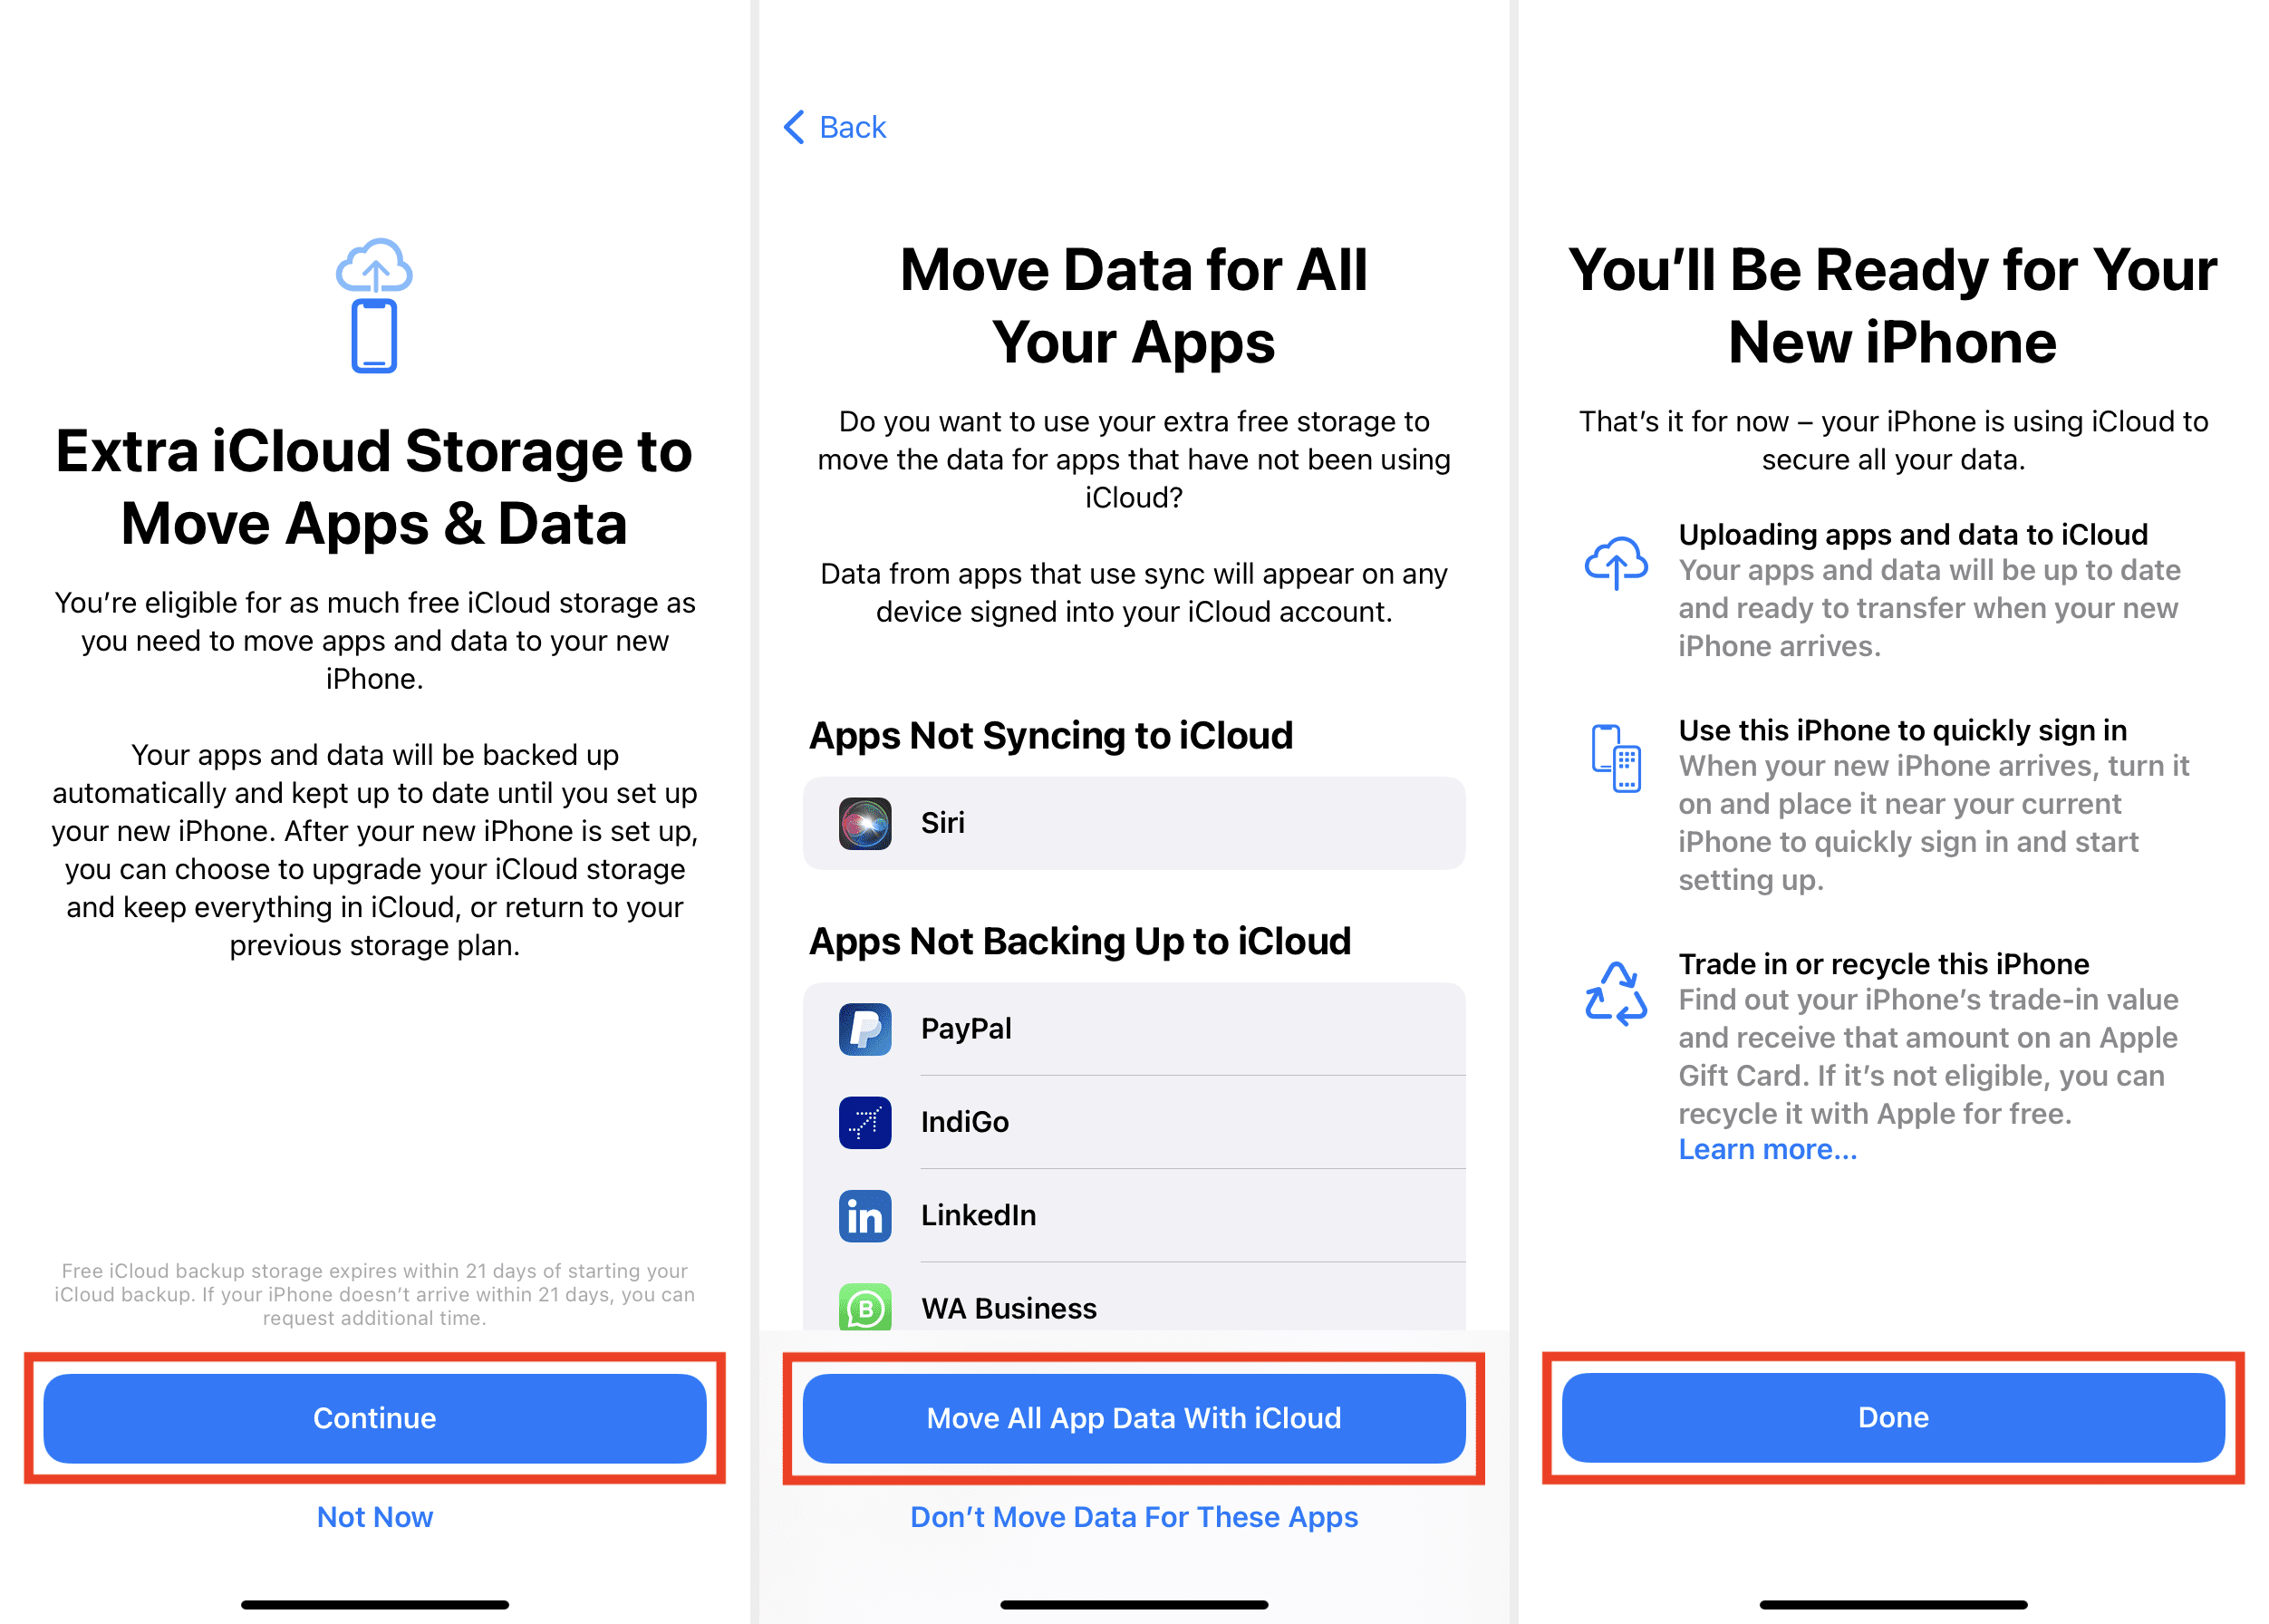 Extra iCloud storage to move apps and data